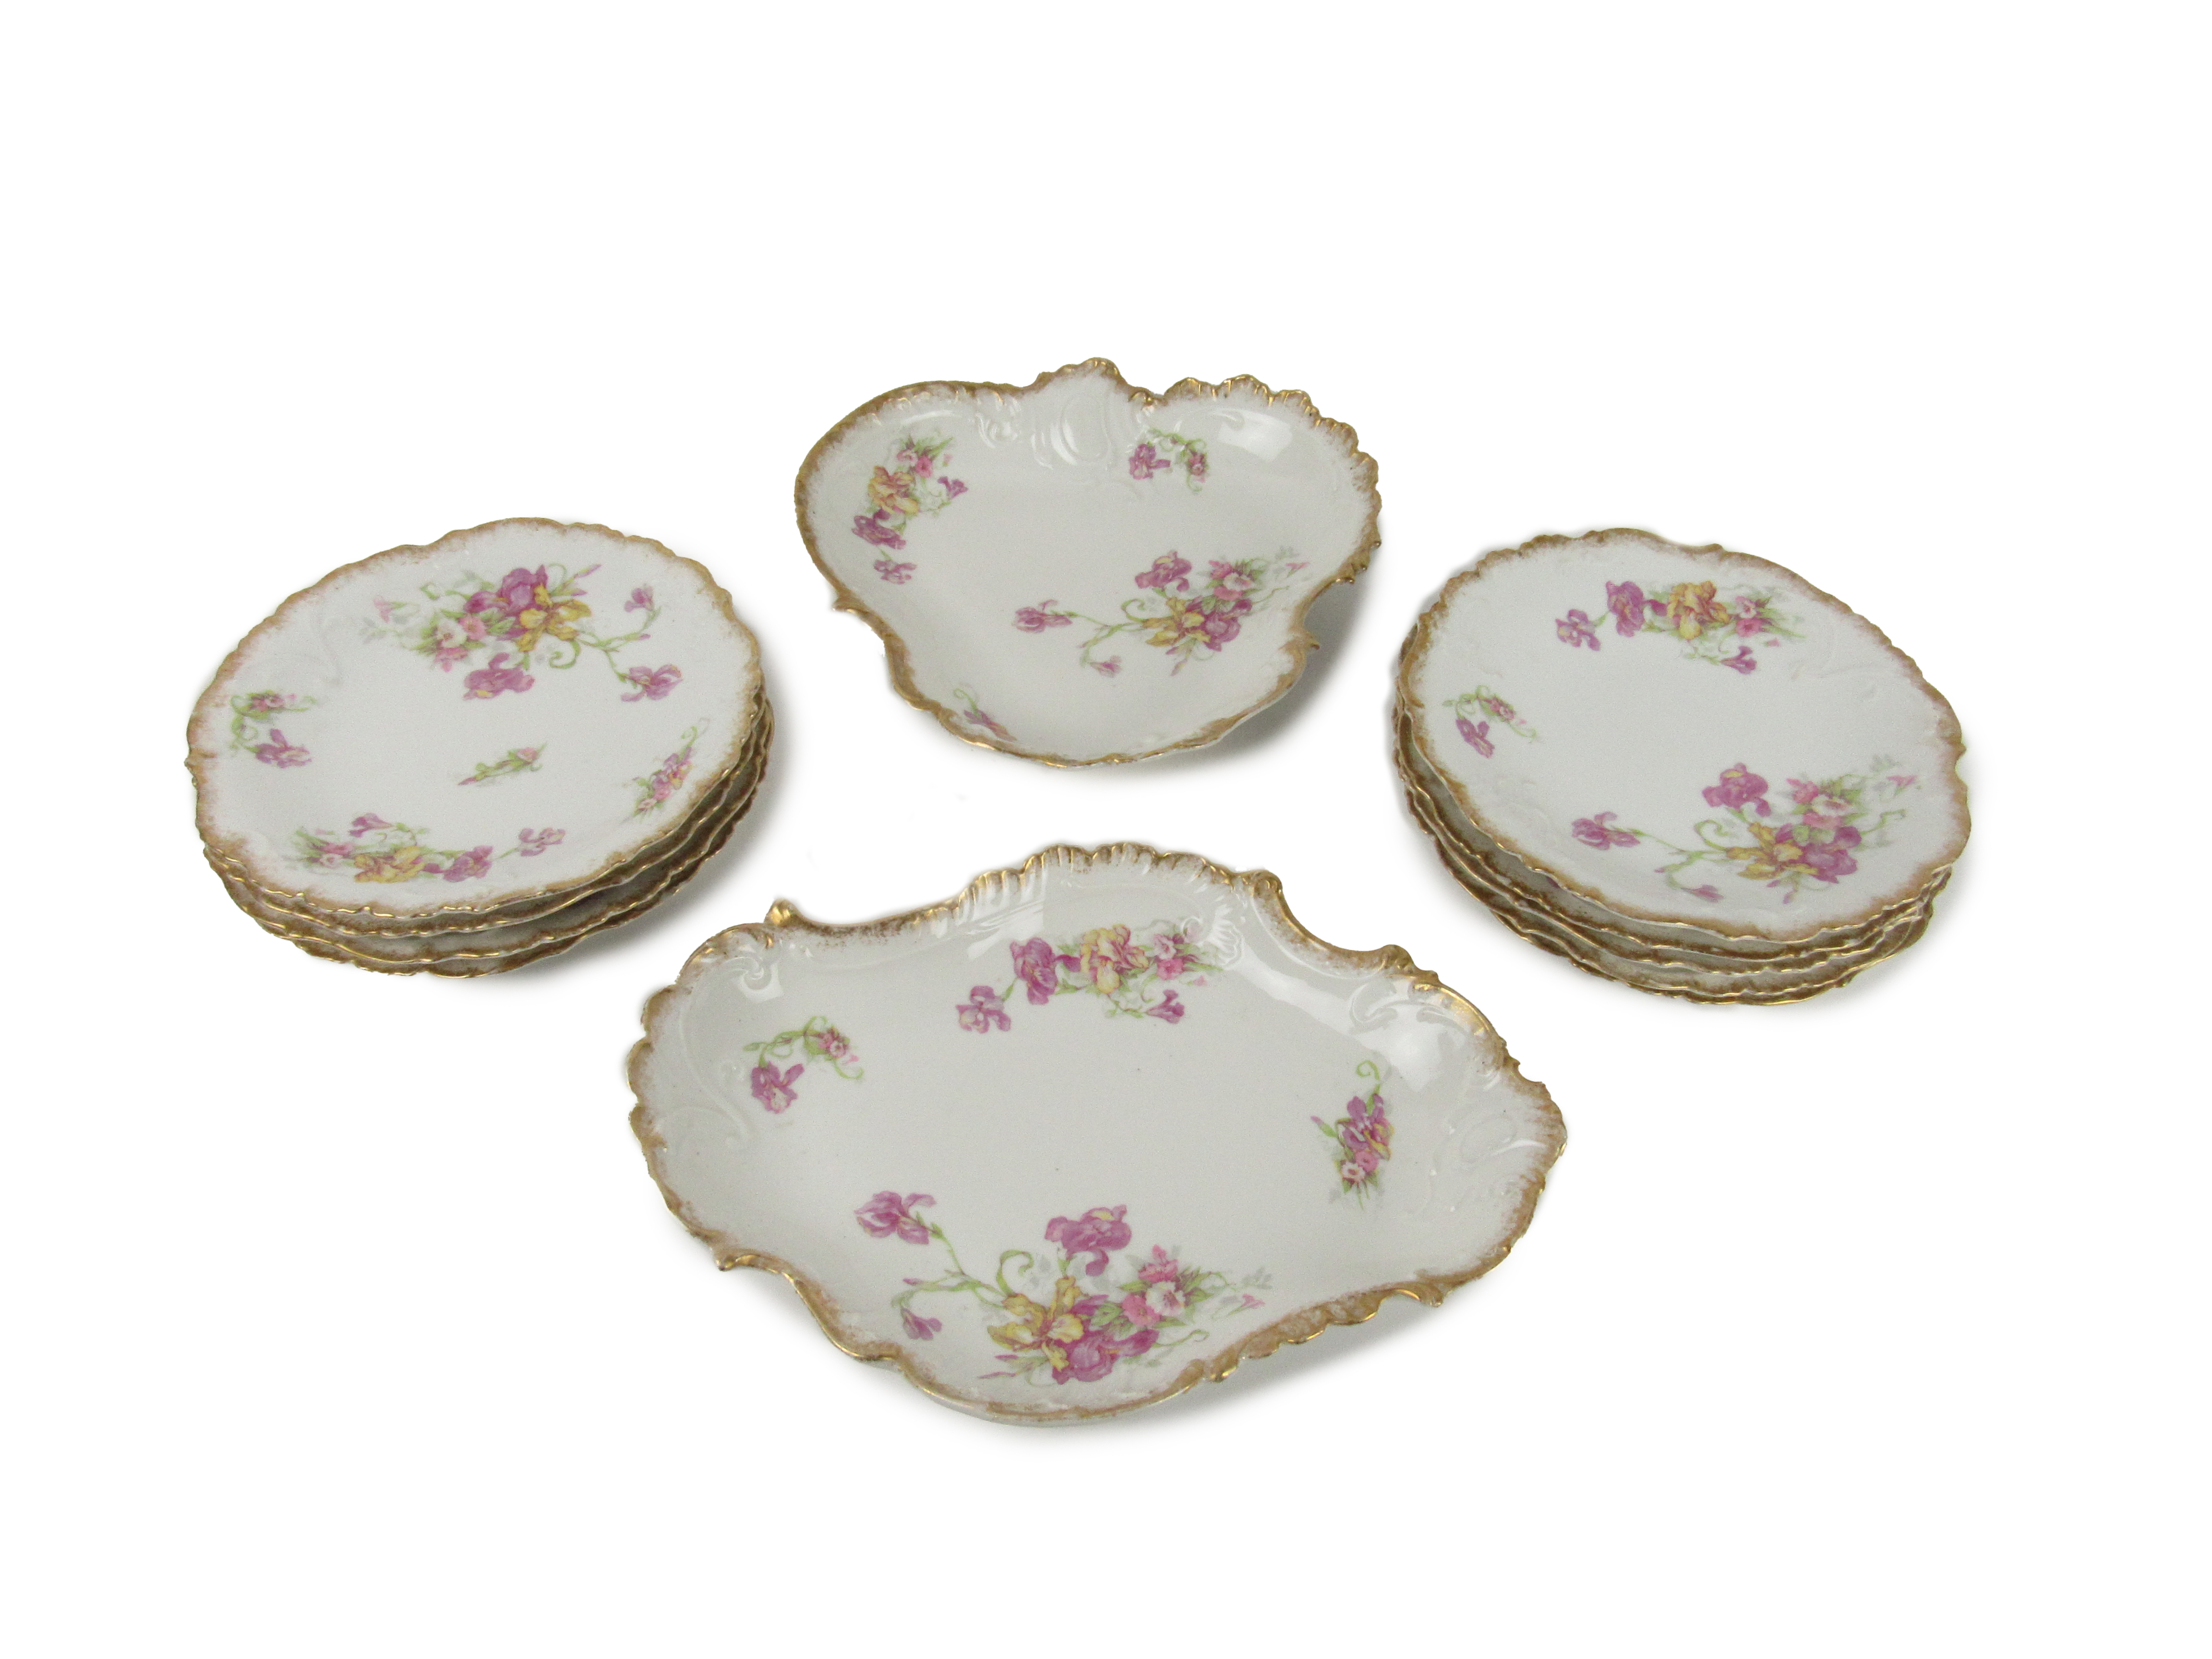 An attractive 11 piece Limoges French porcelain Dessert Service, each decorated with pink flowers,